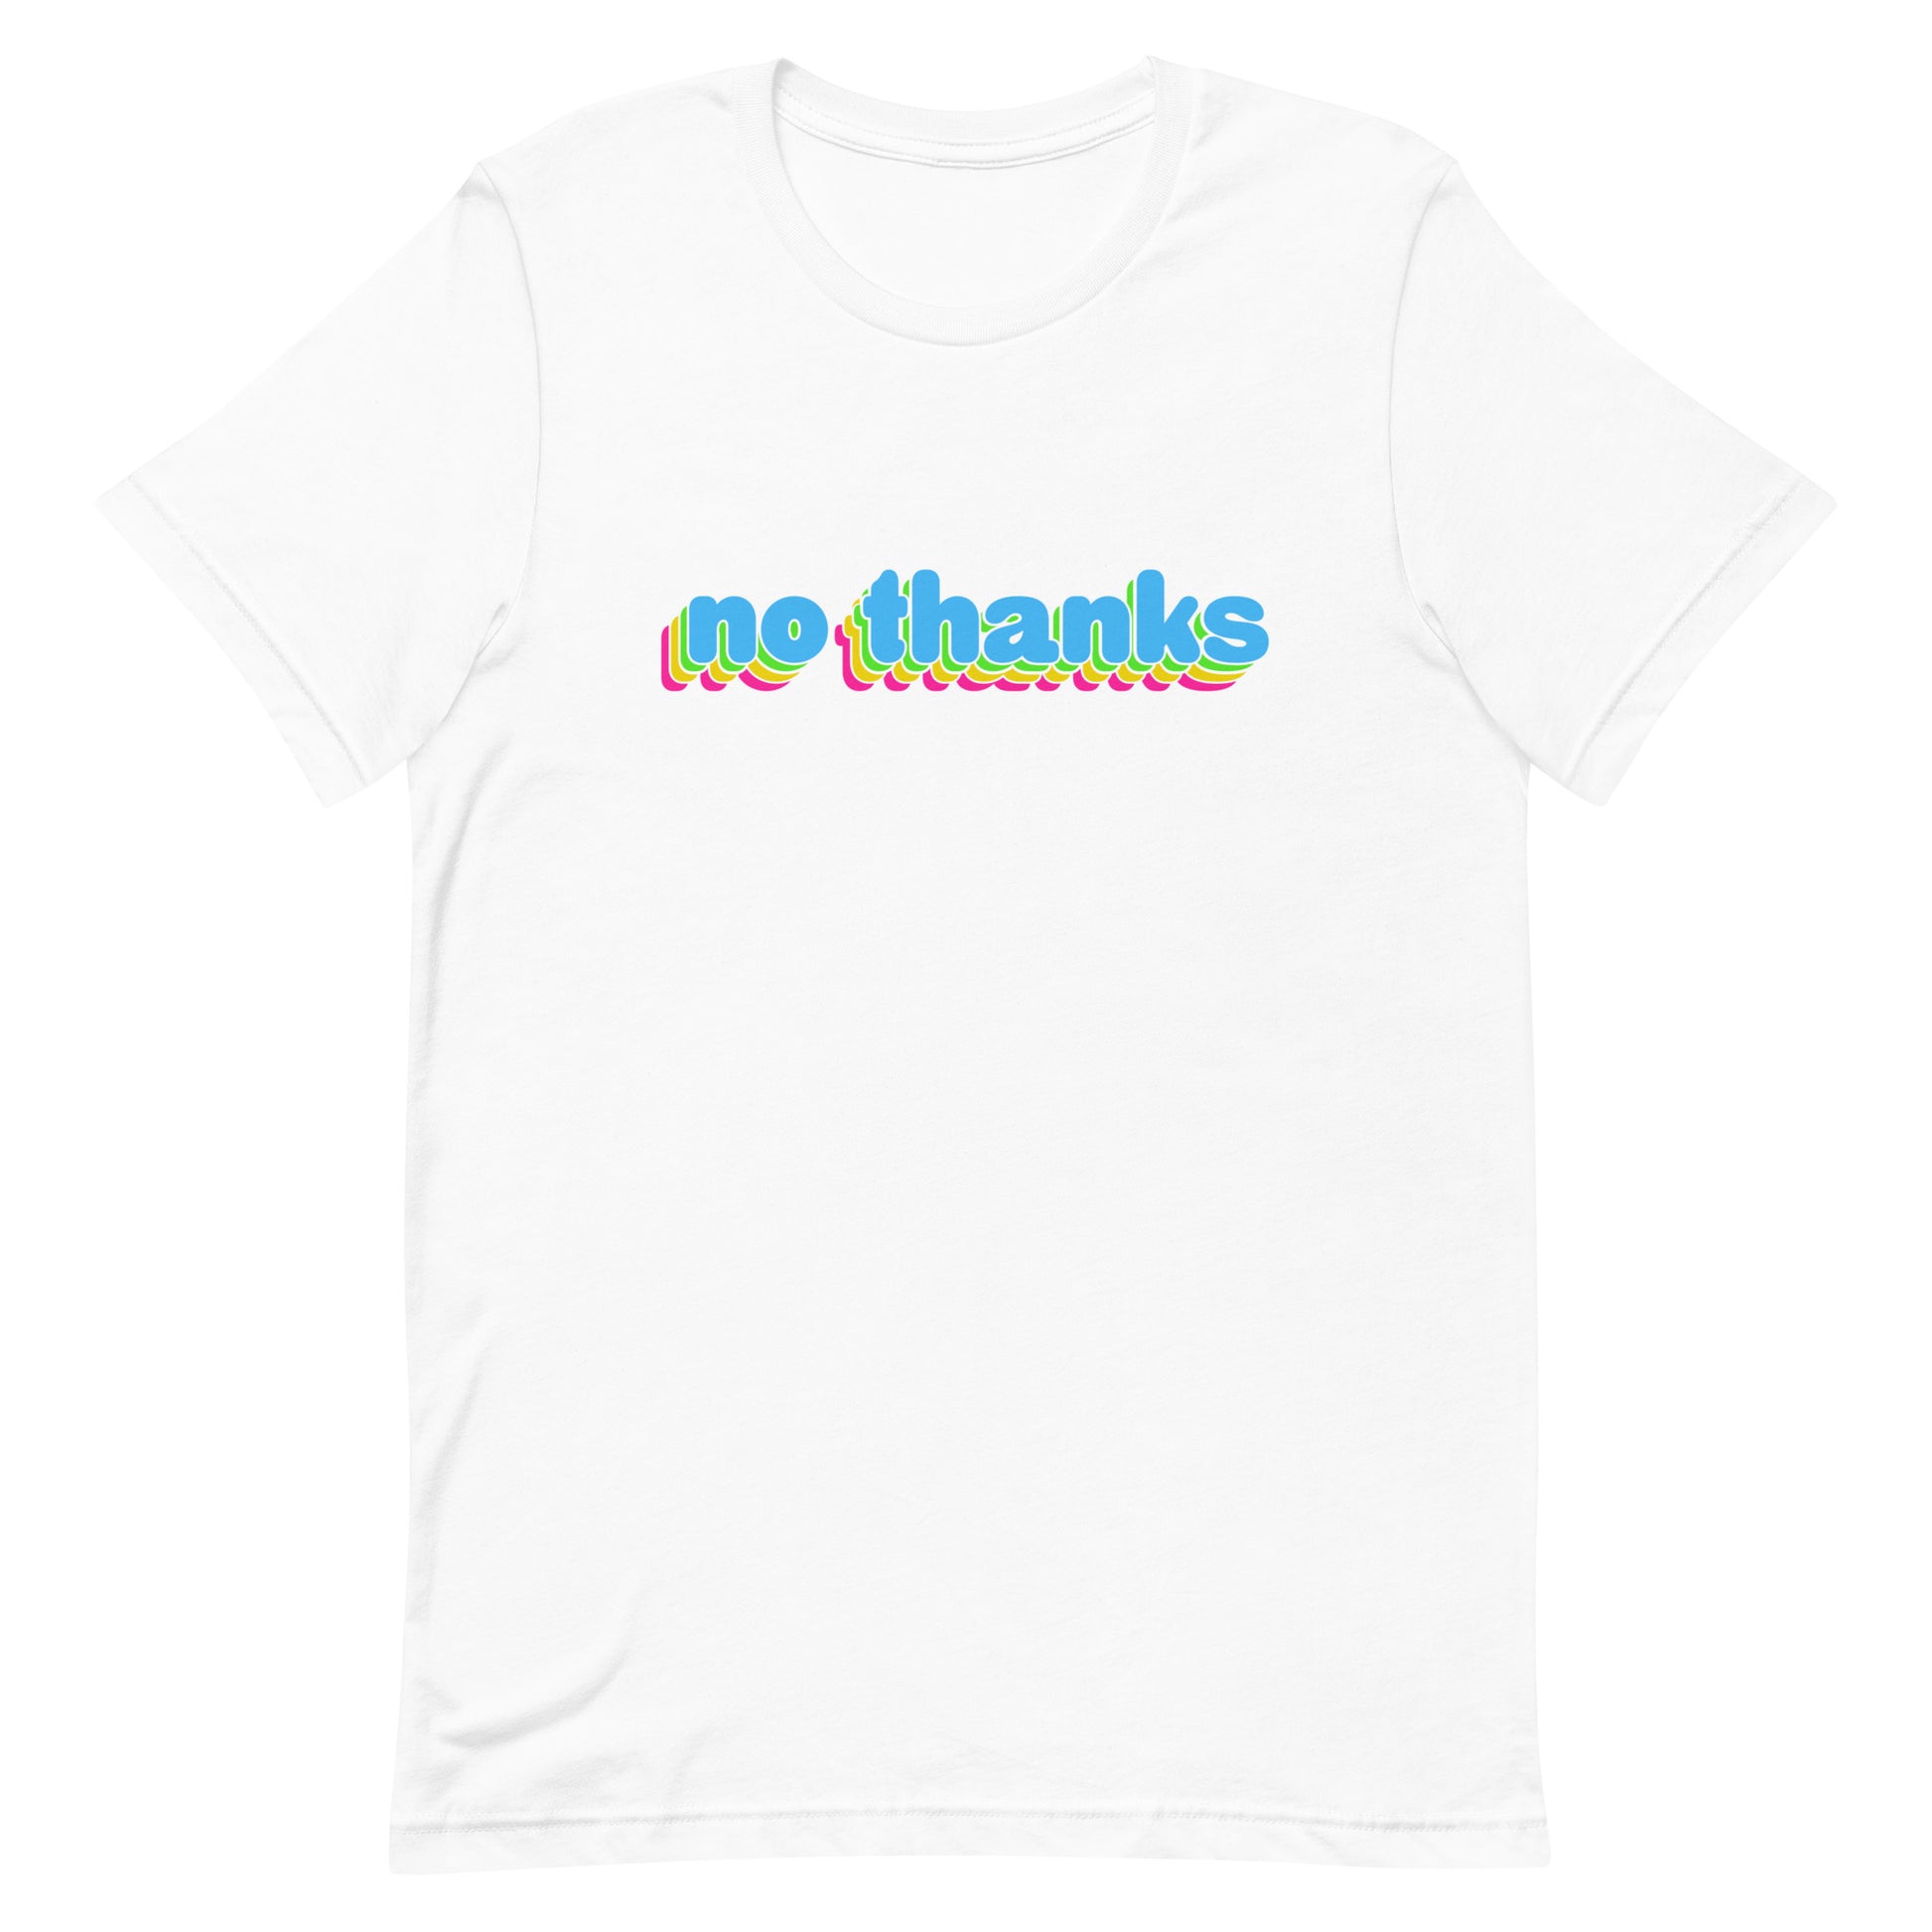 A white crewneck t-shirt featuring colorful bubble text reading "no thanks"